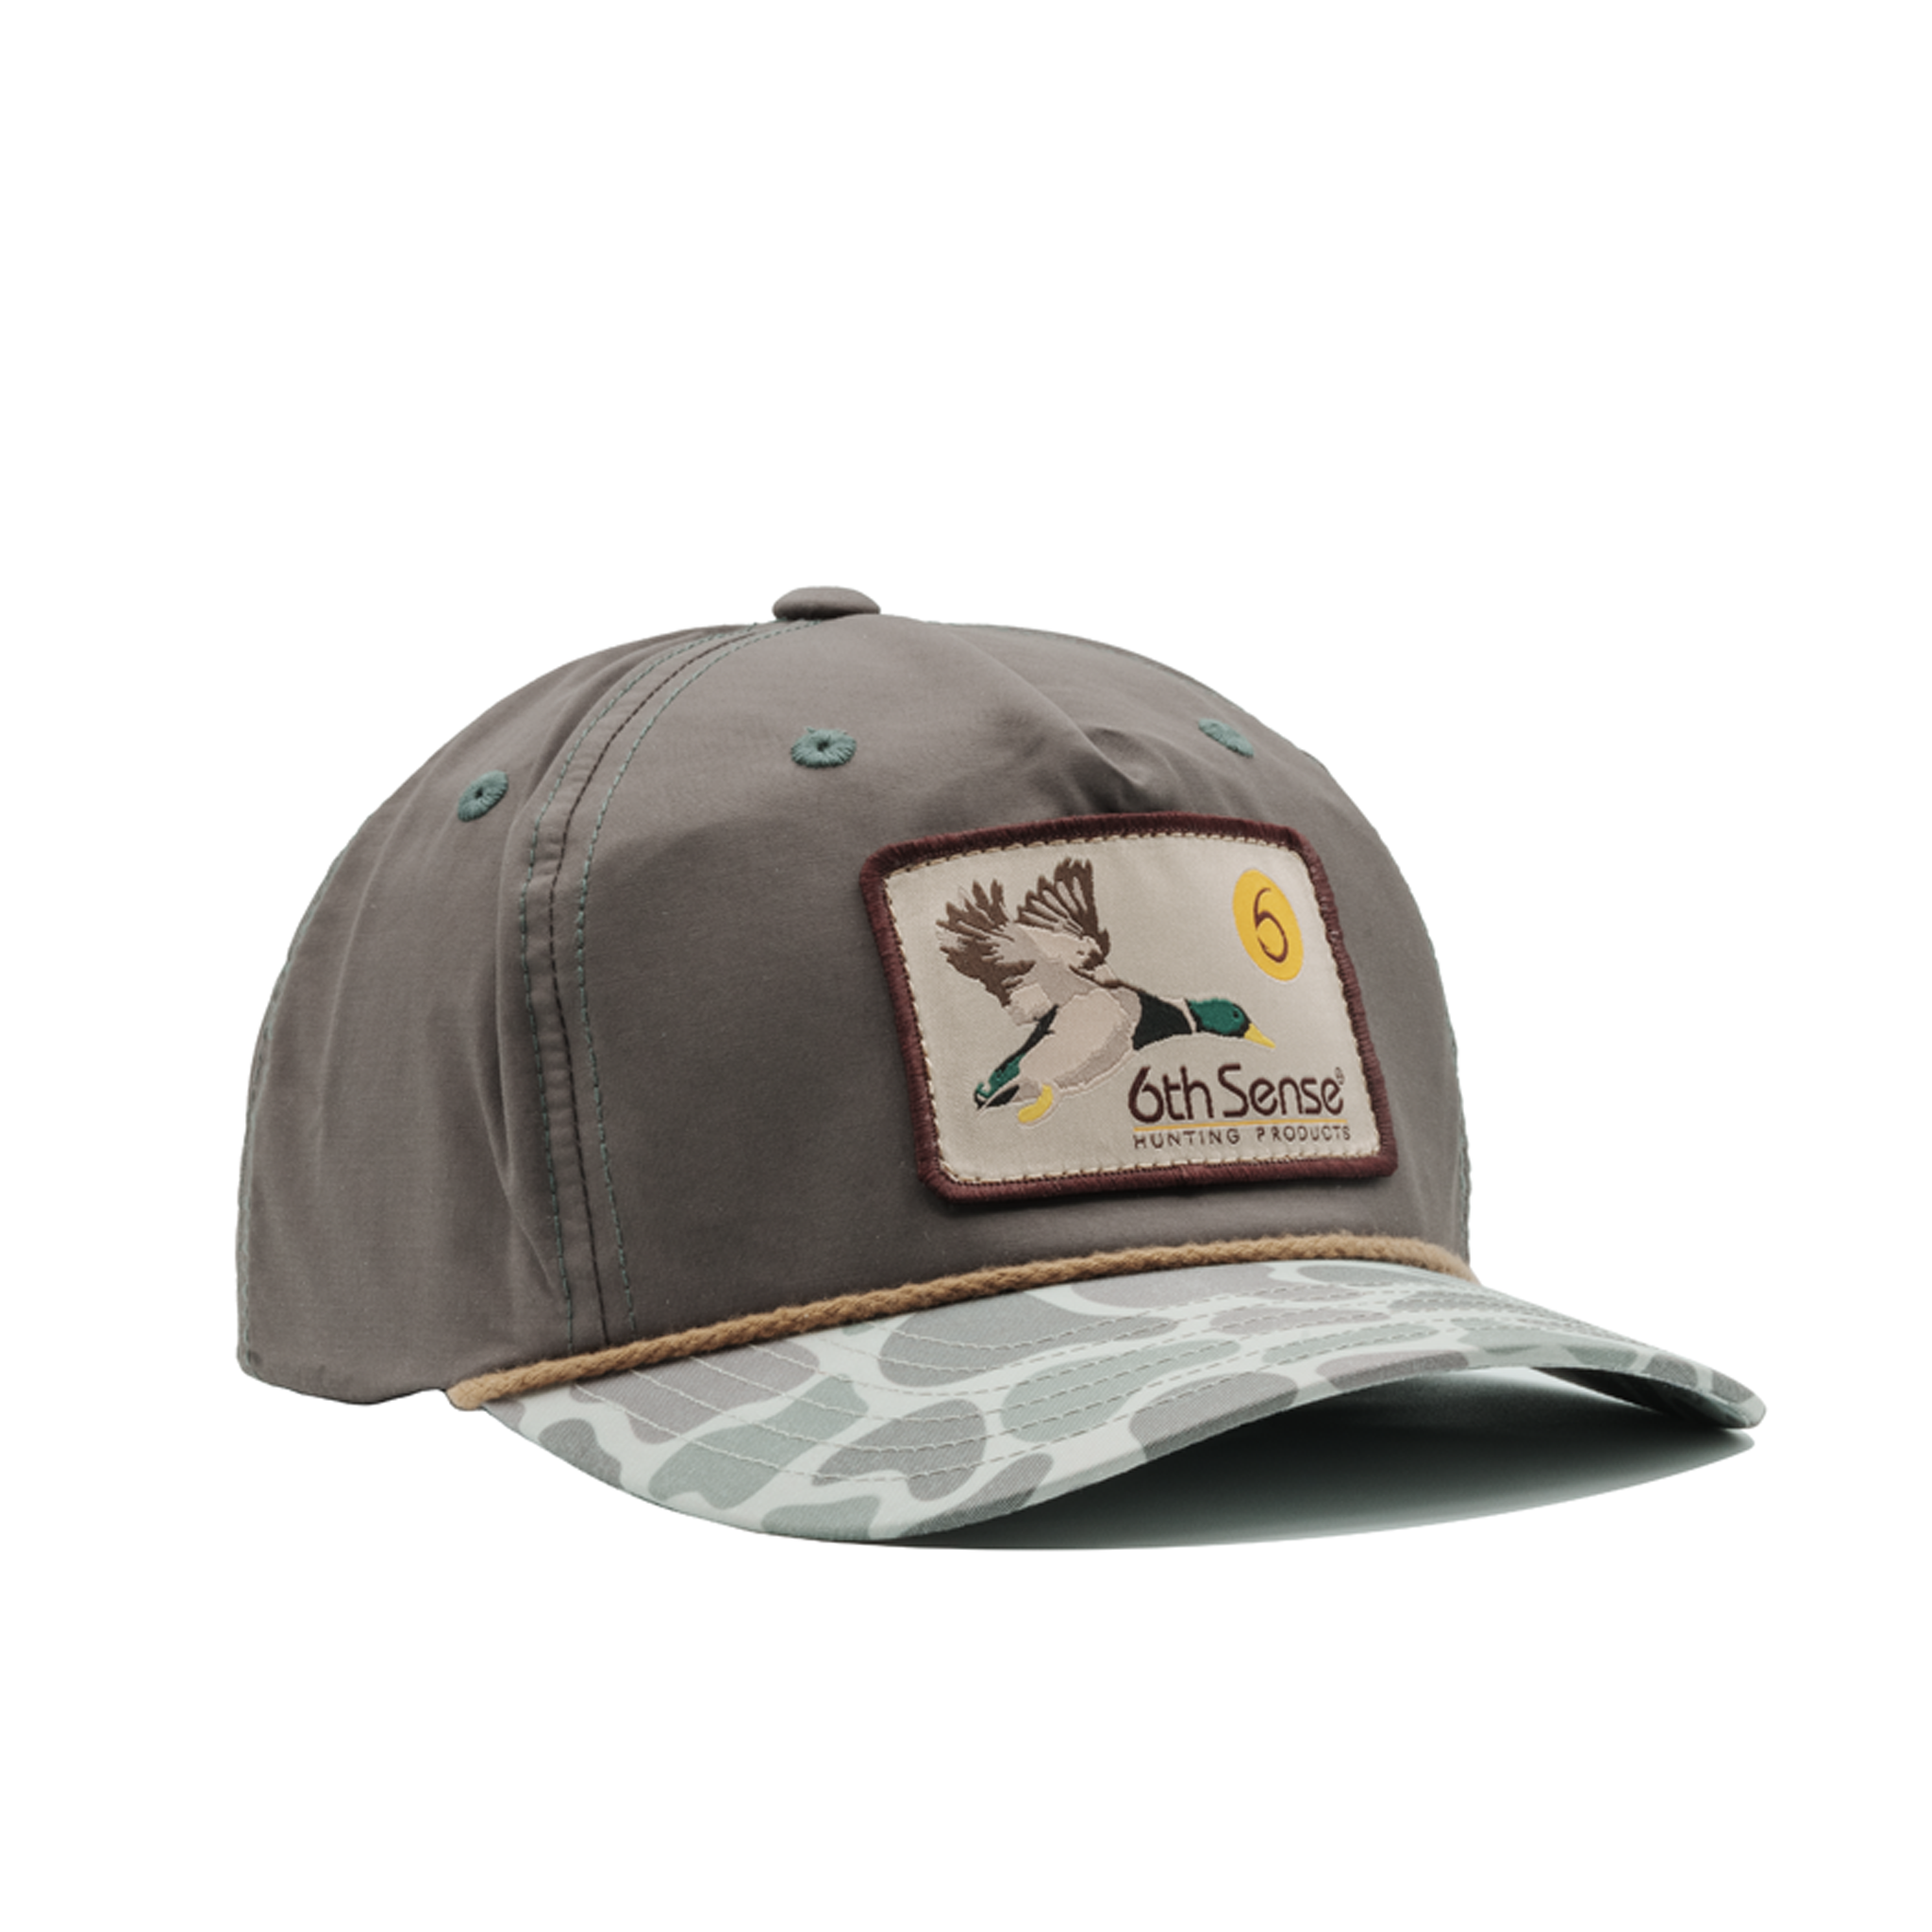 Hundreds of hats to choose from at - 6th Sense Fishing